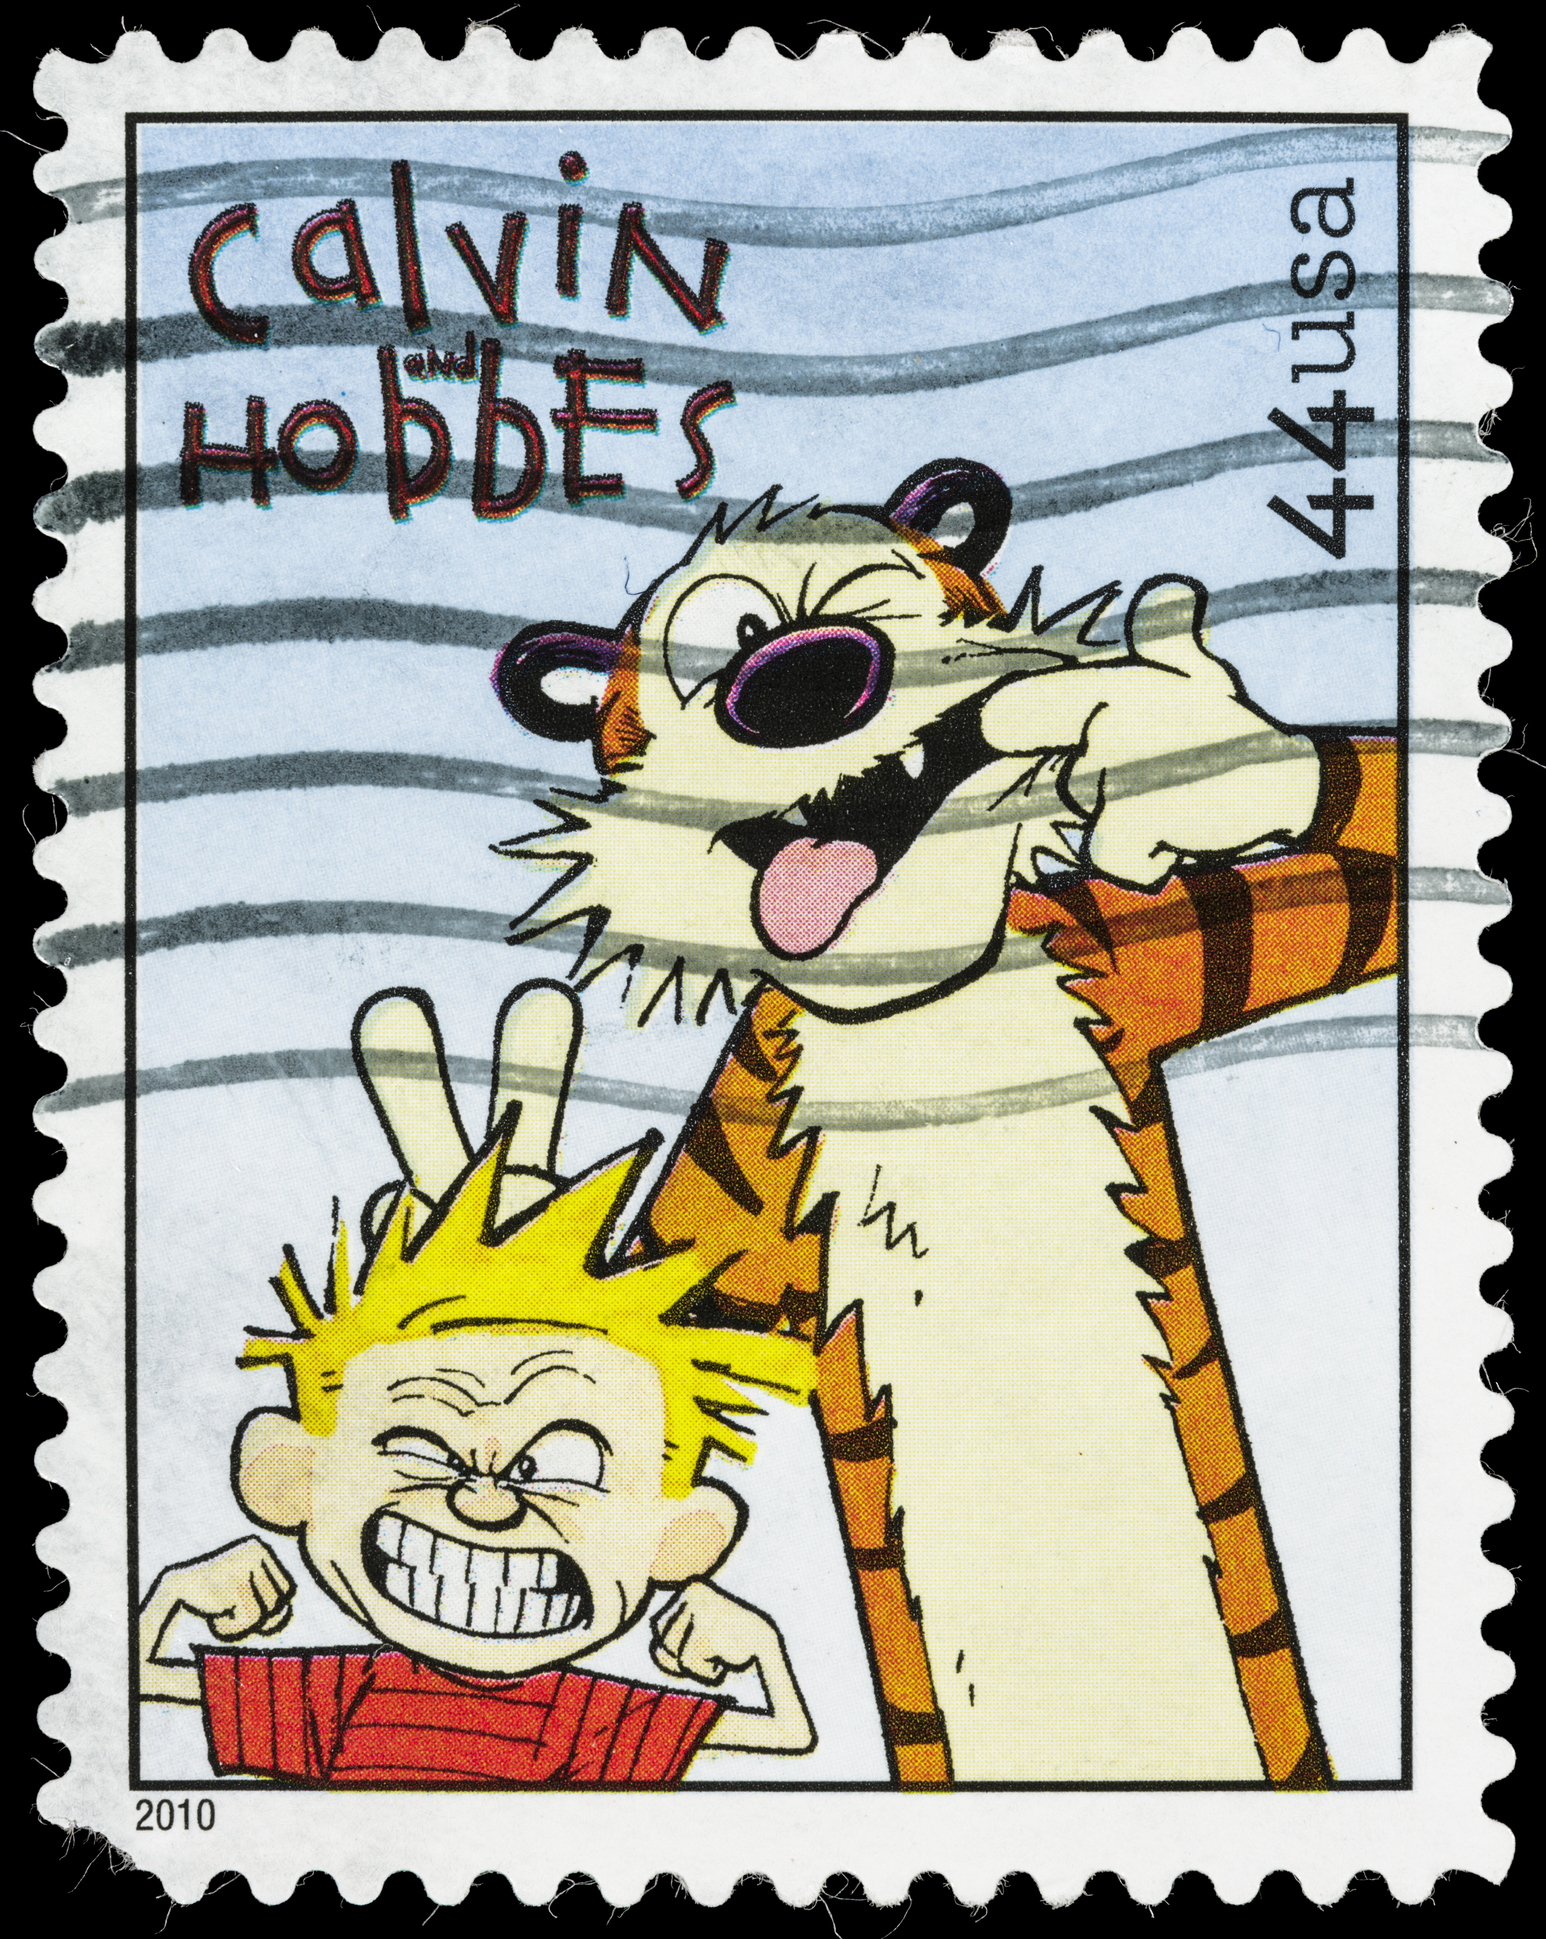 U.S. postage stamp featuring Calvin and Hobbes with Calvin making a face and Hobbes behind him